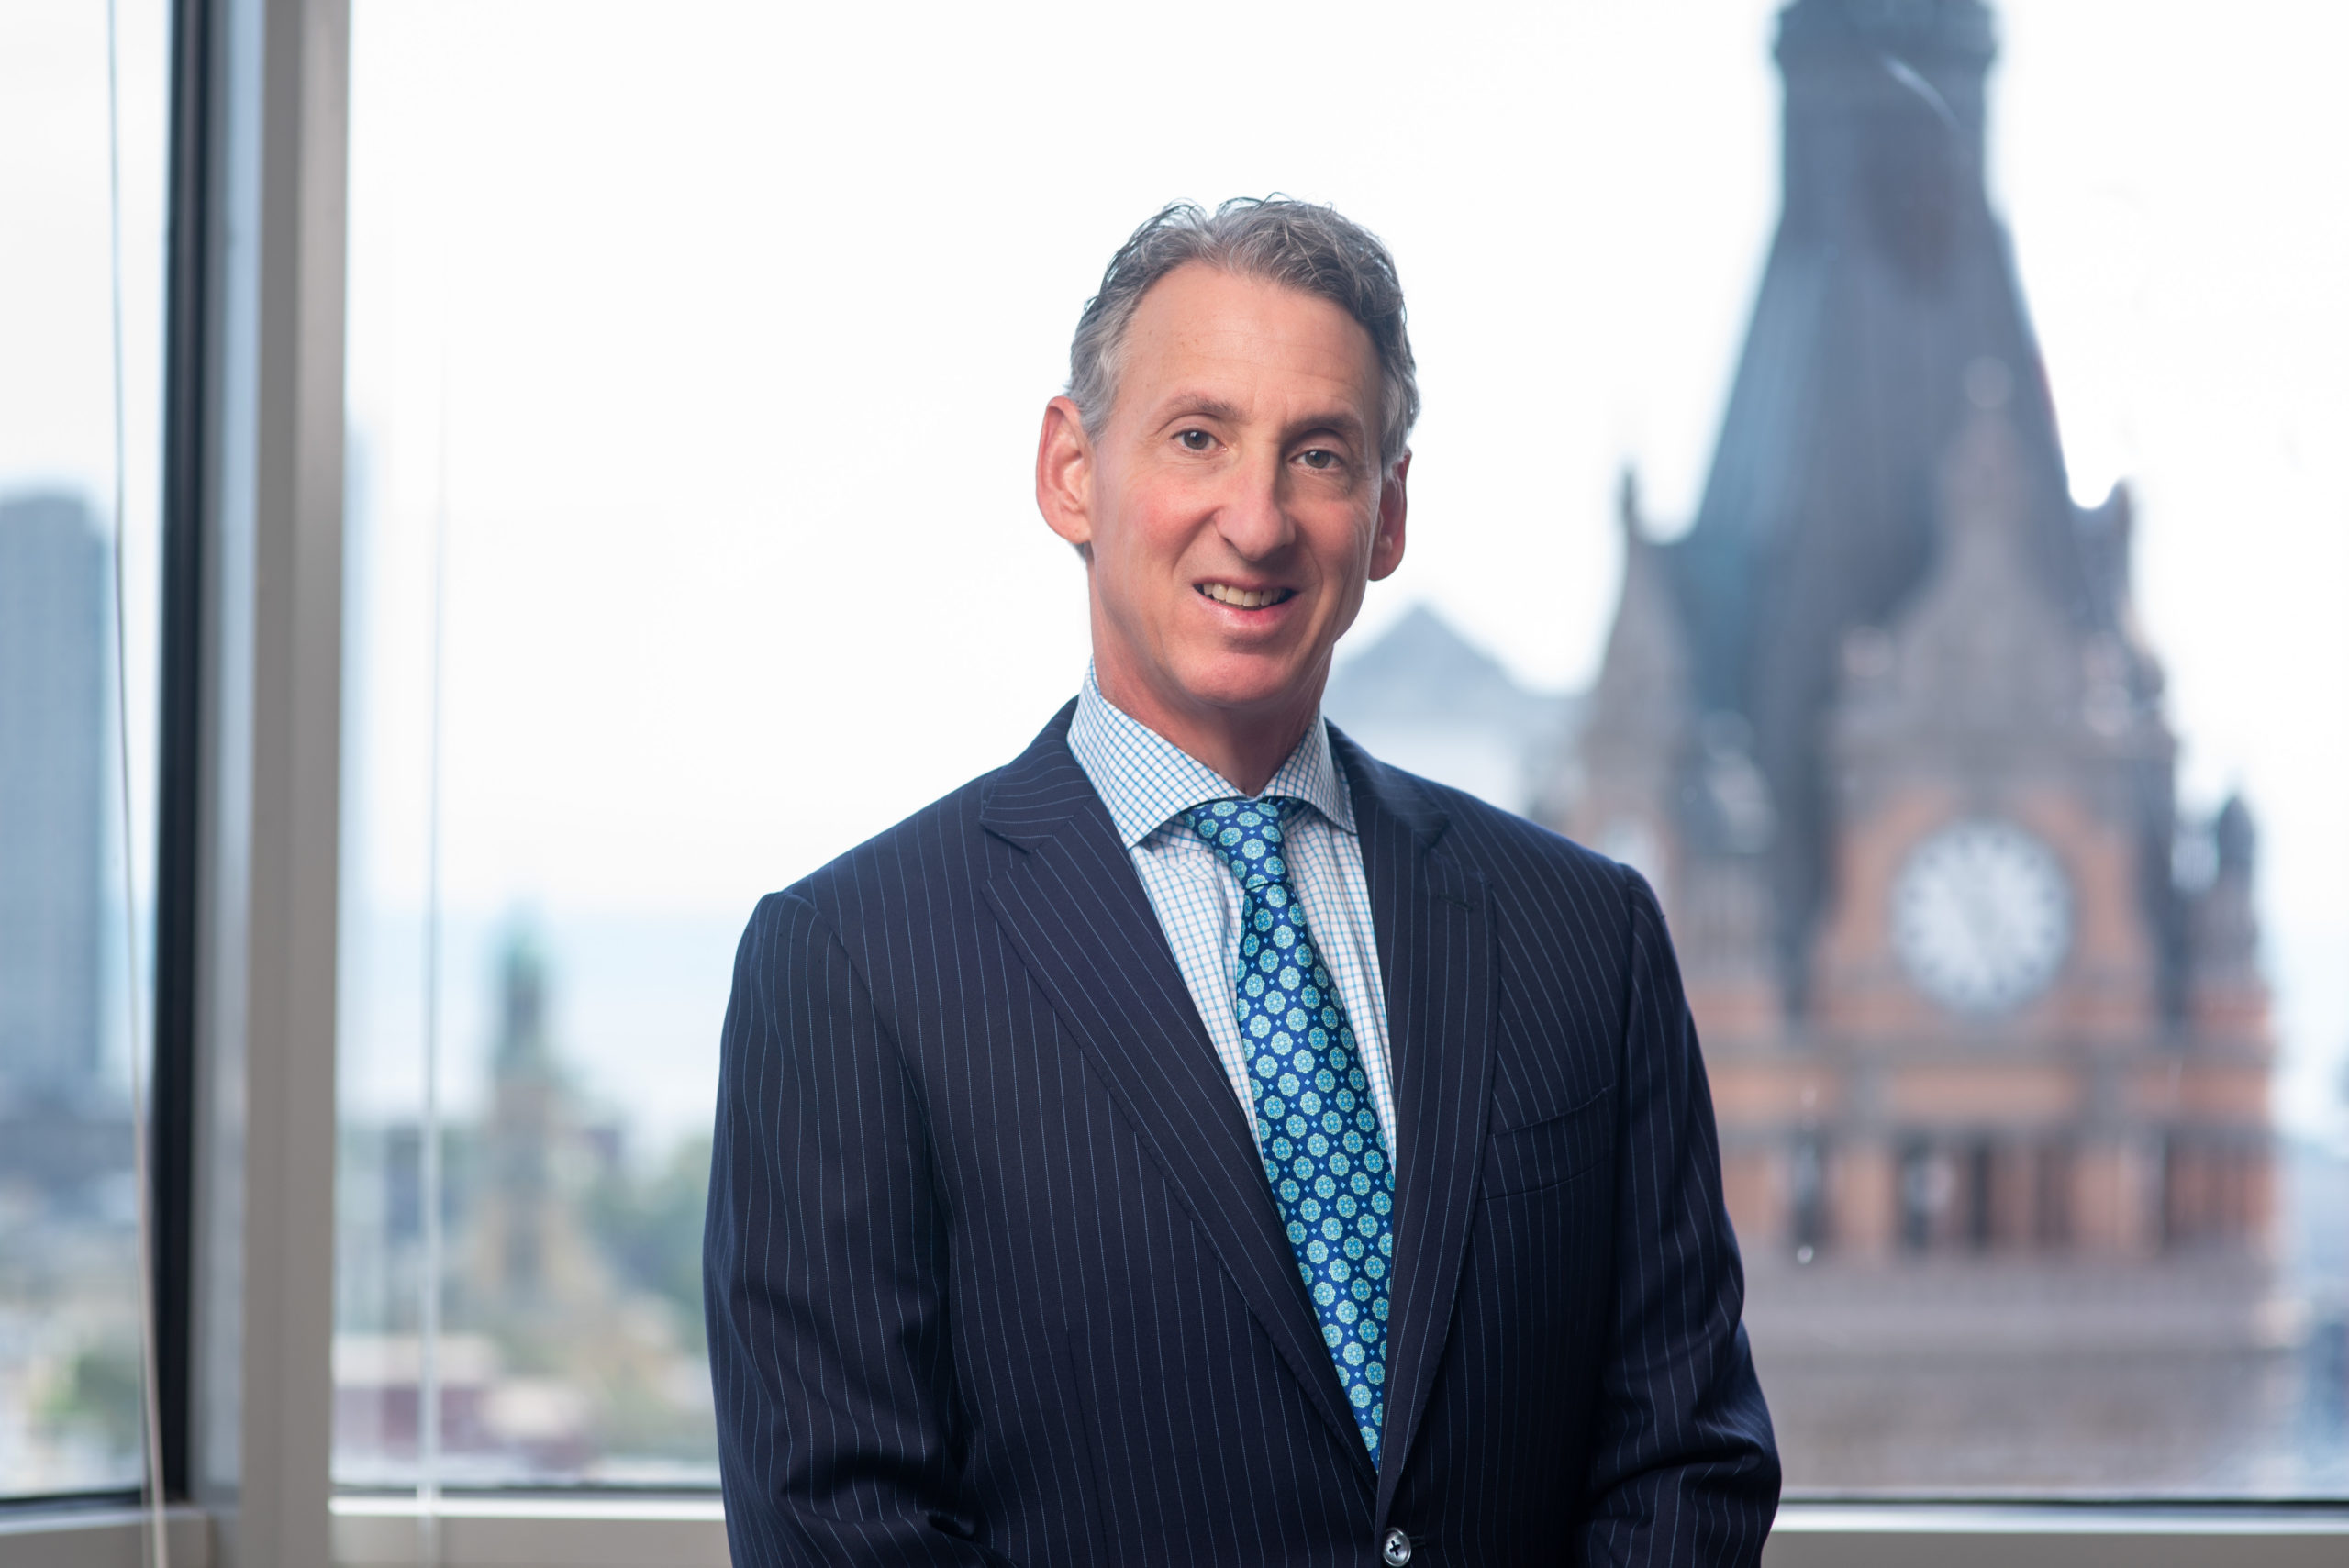 Attorney Michael Cohen to Present at the National Business Institute’s Seminar "Expert Witnesses: Using Wisconsin Court Rules to Your Advantage"